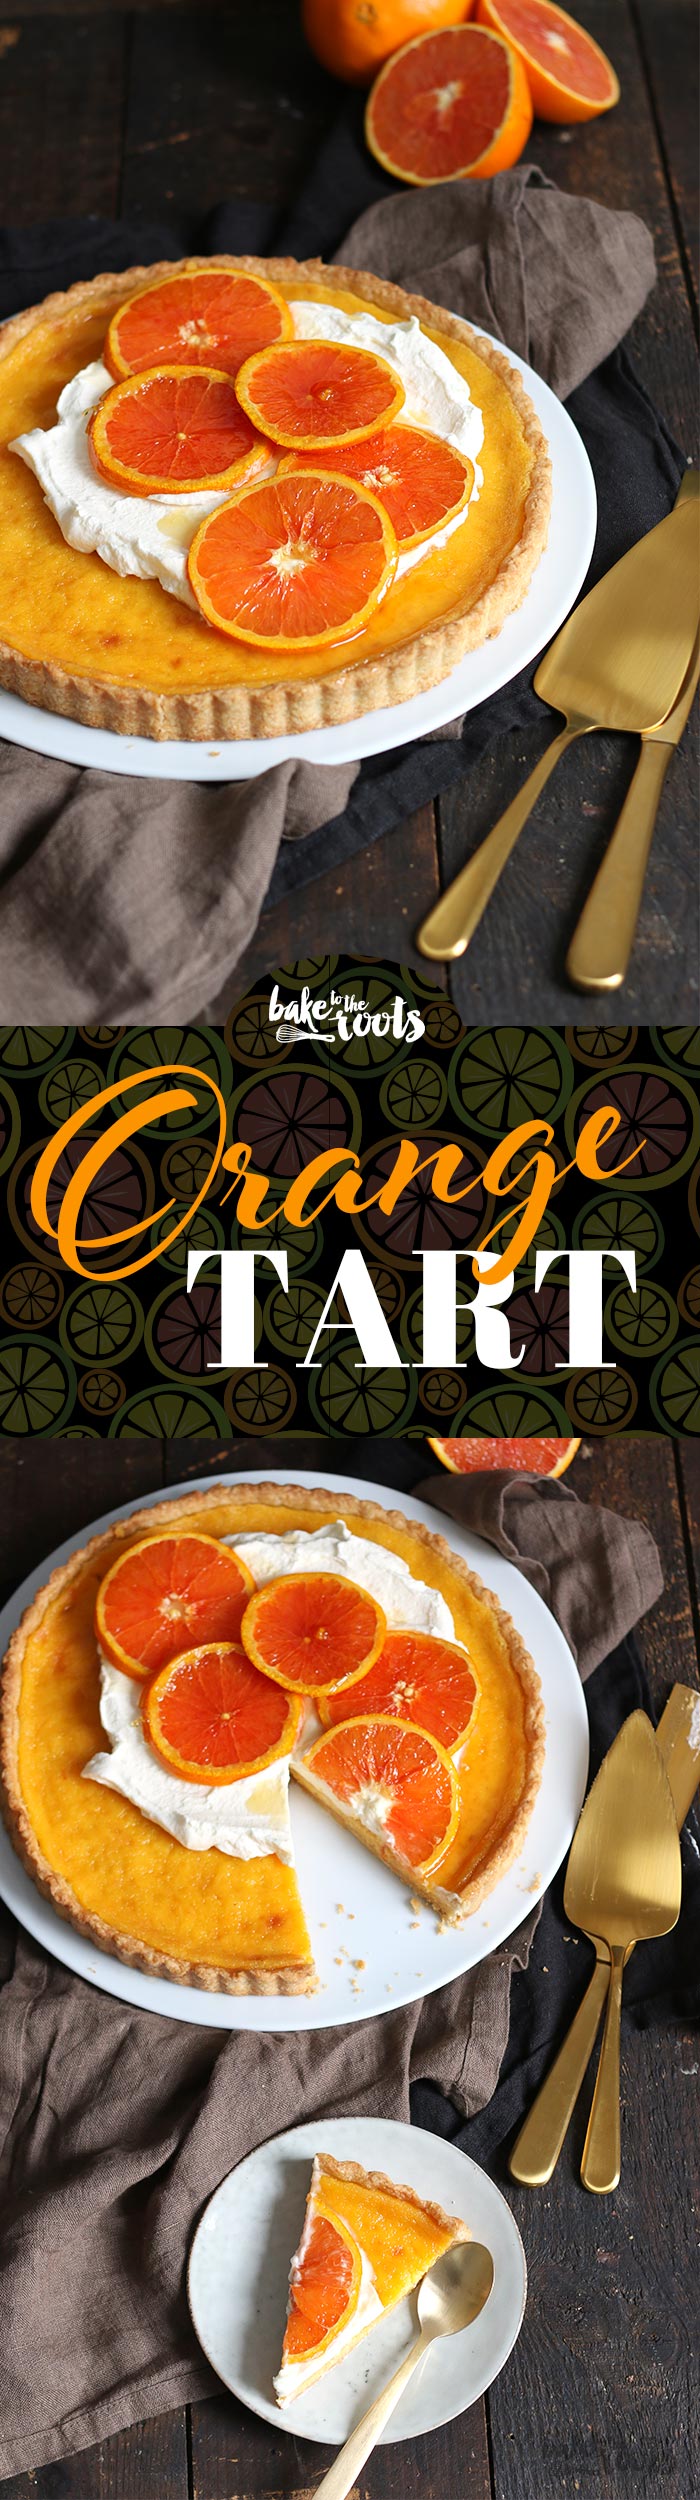 Delicious Orange Tart with Caramelized Oranges | Bake to the roots